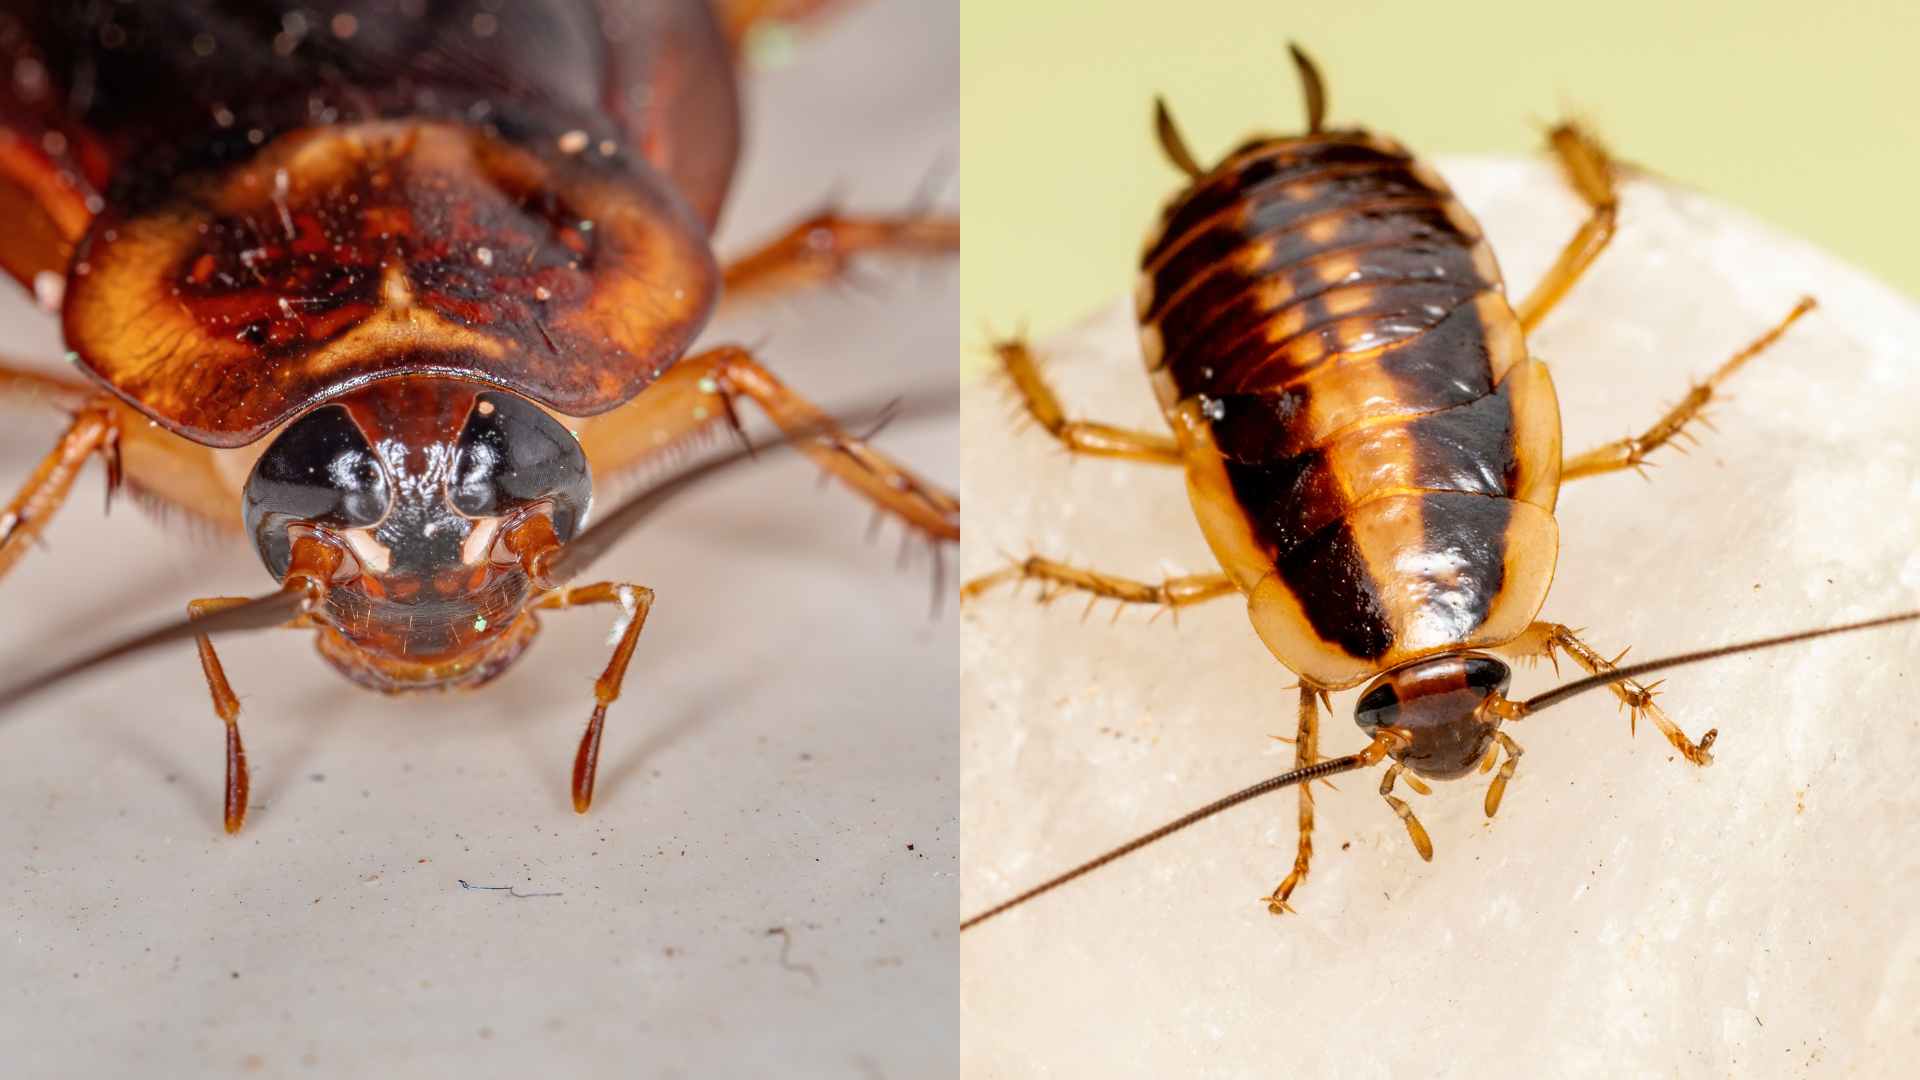 American Roaches vs German Roaches: Which is Tougher?